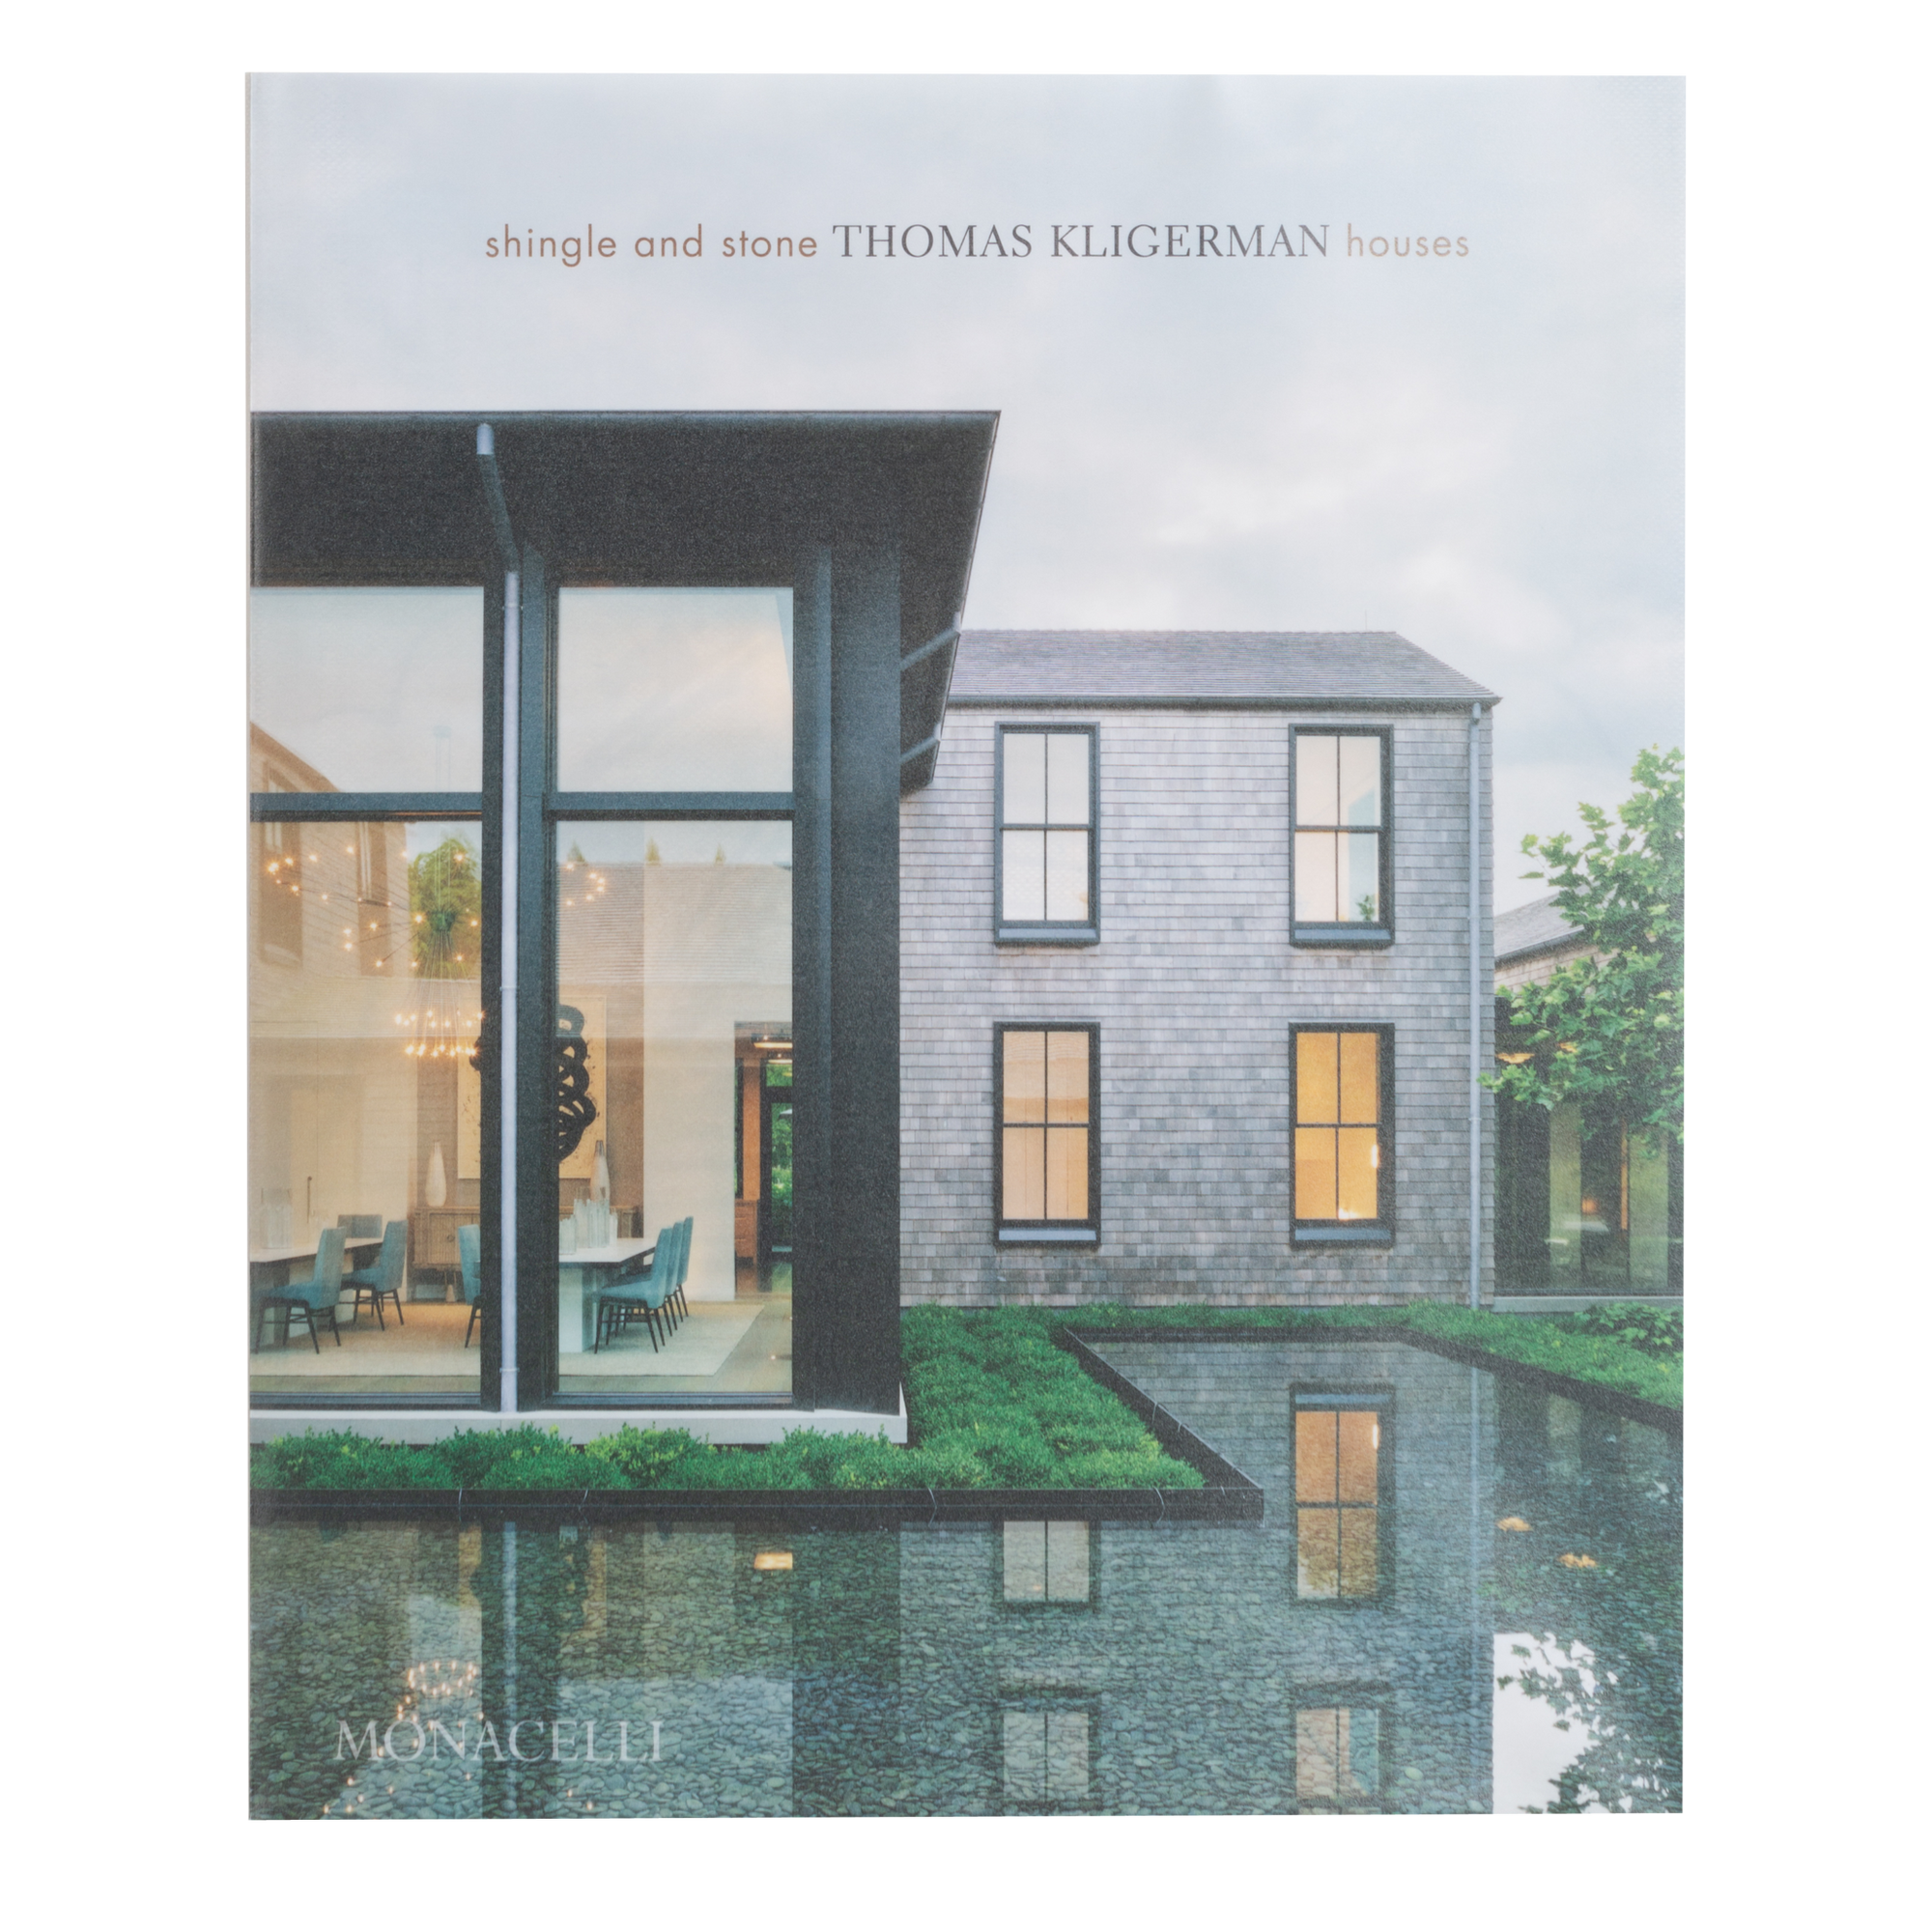 A deluxe new monograph that presents a selection of elegantly sumptuous houses by renowned architect Thomas Kligerman.